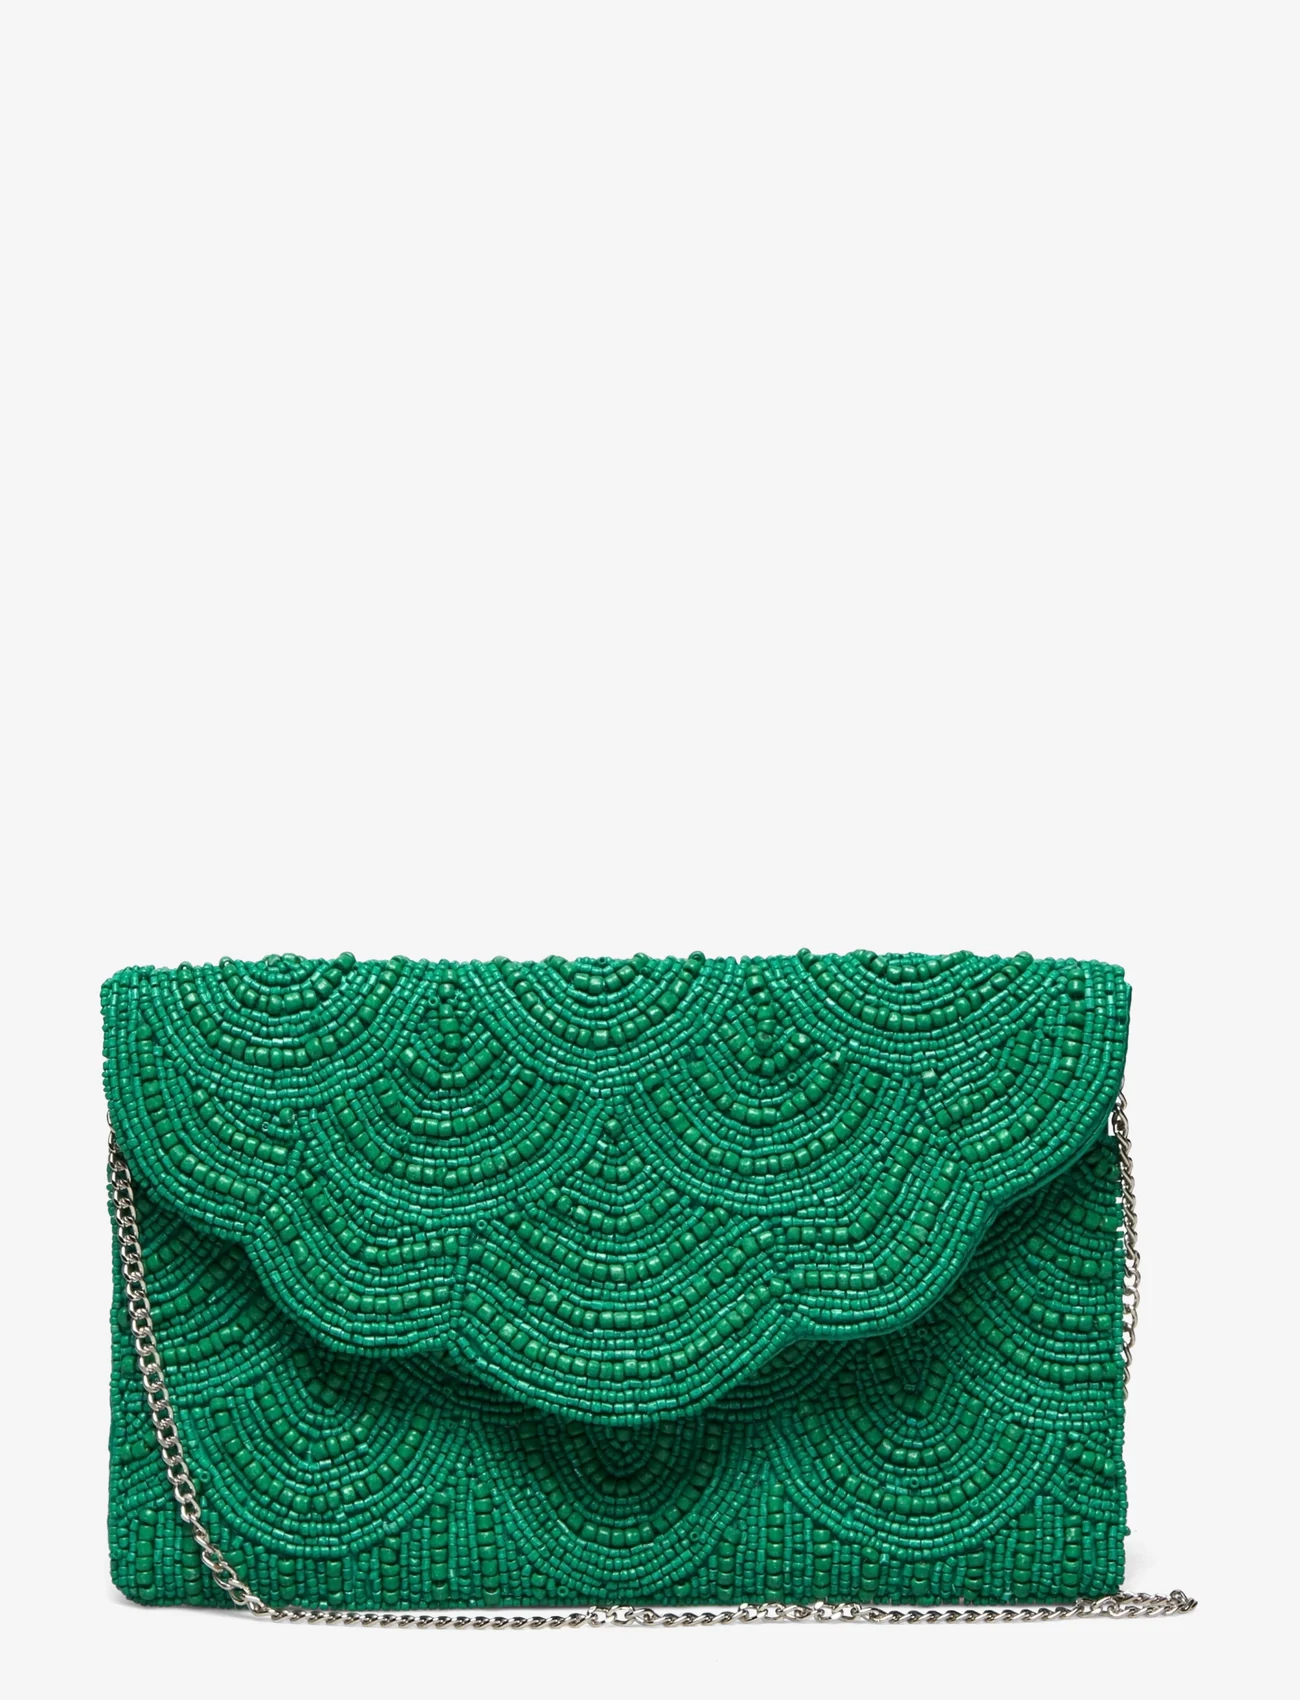 Pipol's Bazaar - Casablanca Green Clutch Bag - party wear at outlet prices - green - 0